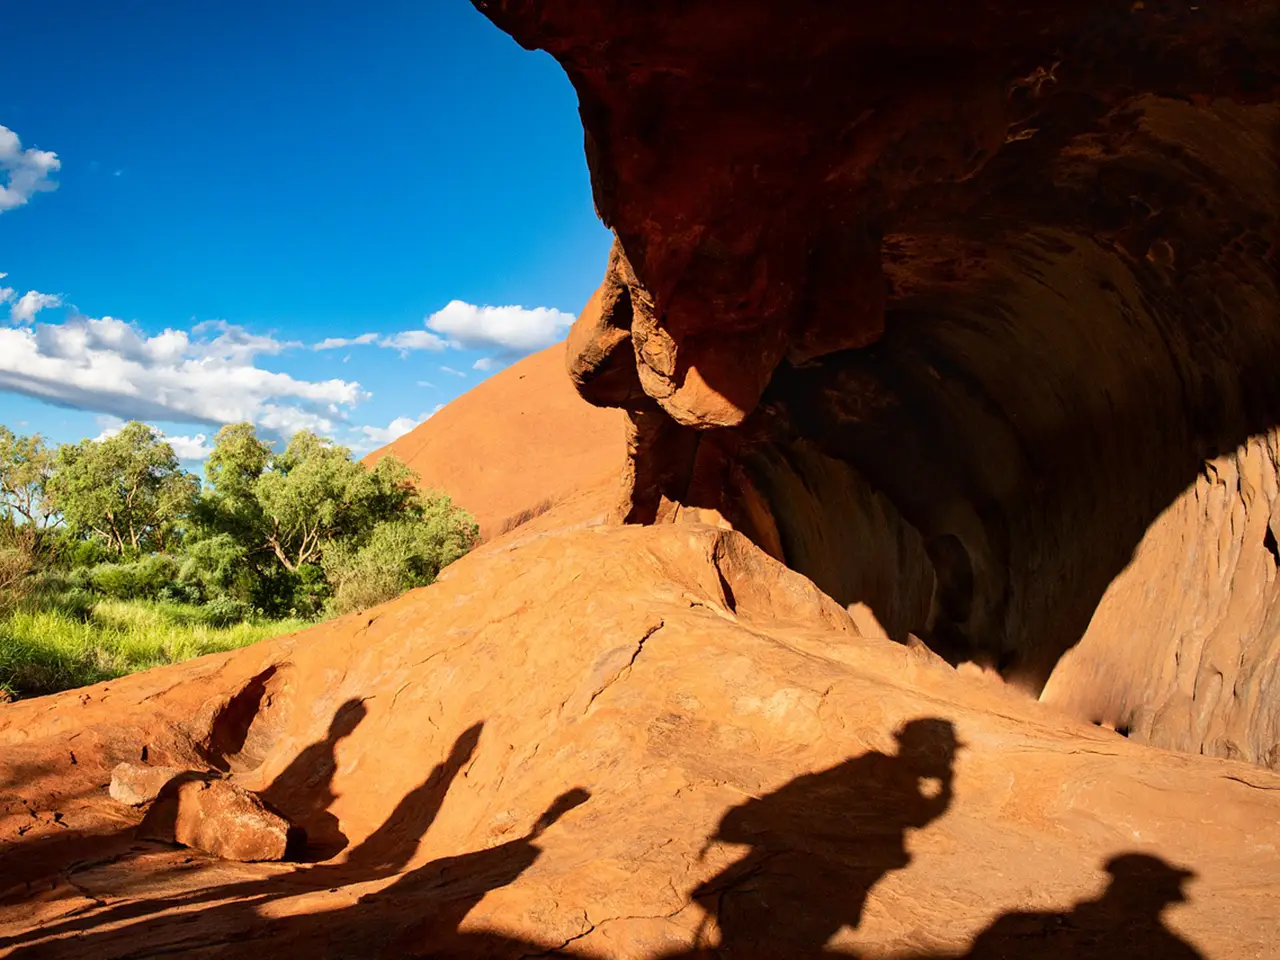 The Uluru, which in local Aboriginal tongue means "shadowy place," rises 348 meters above the plain below.